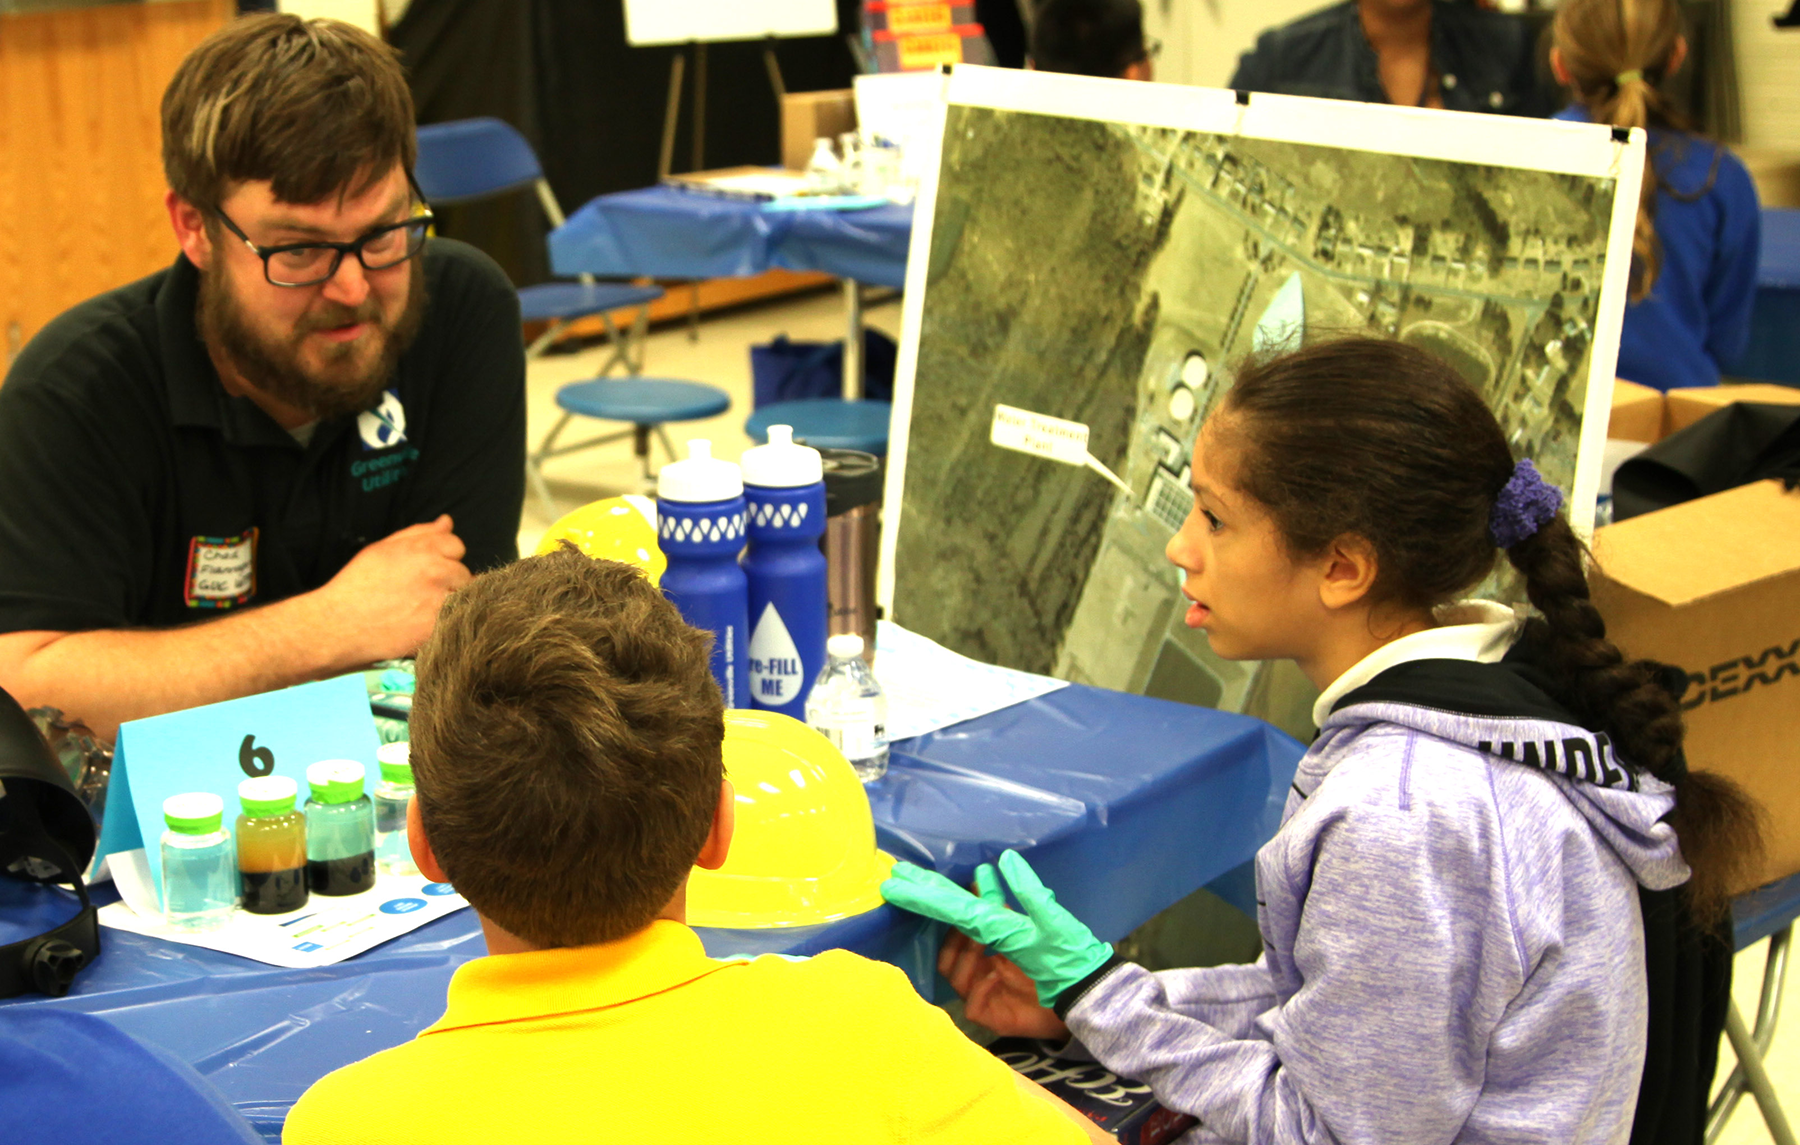 Chad Flannagan (Water) speaks with Students at Elmhurst